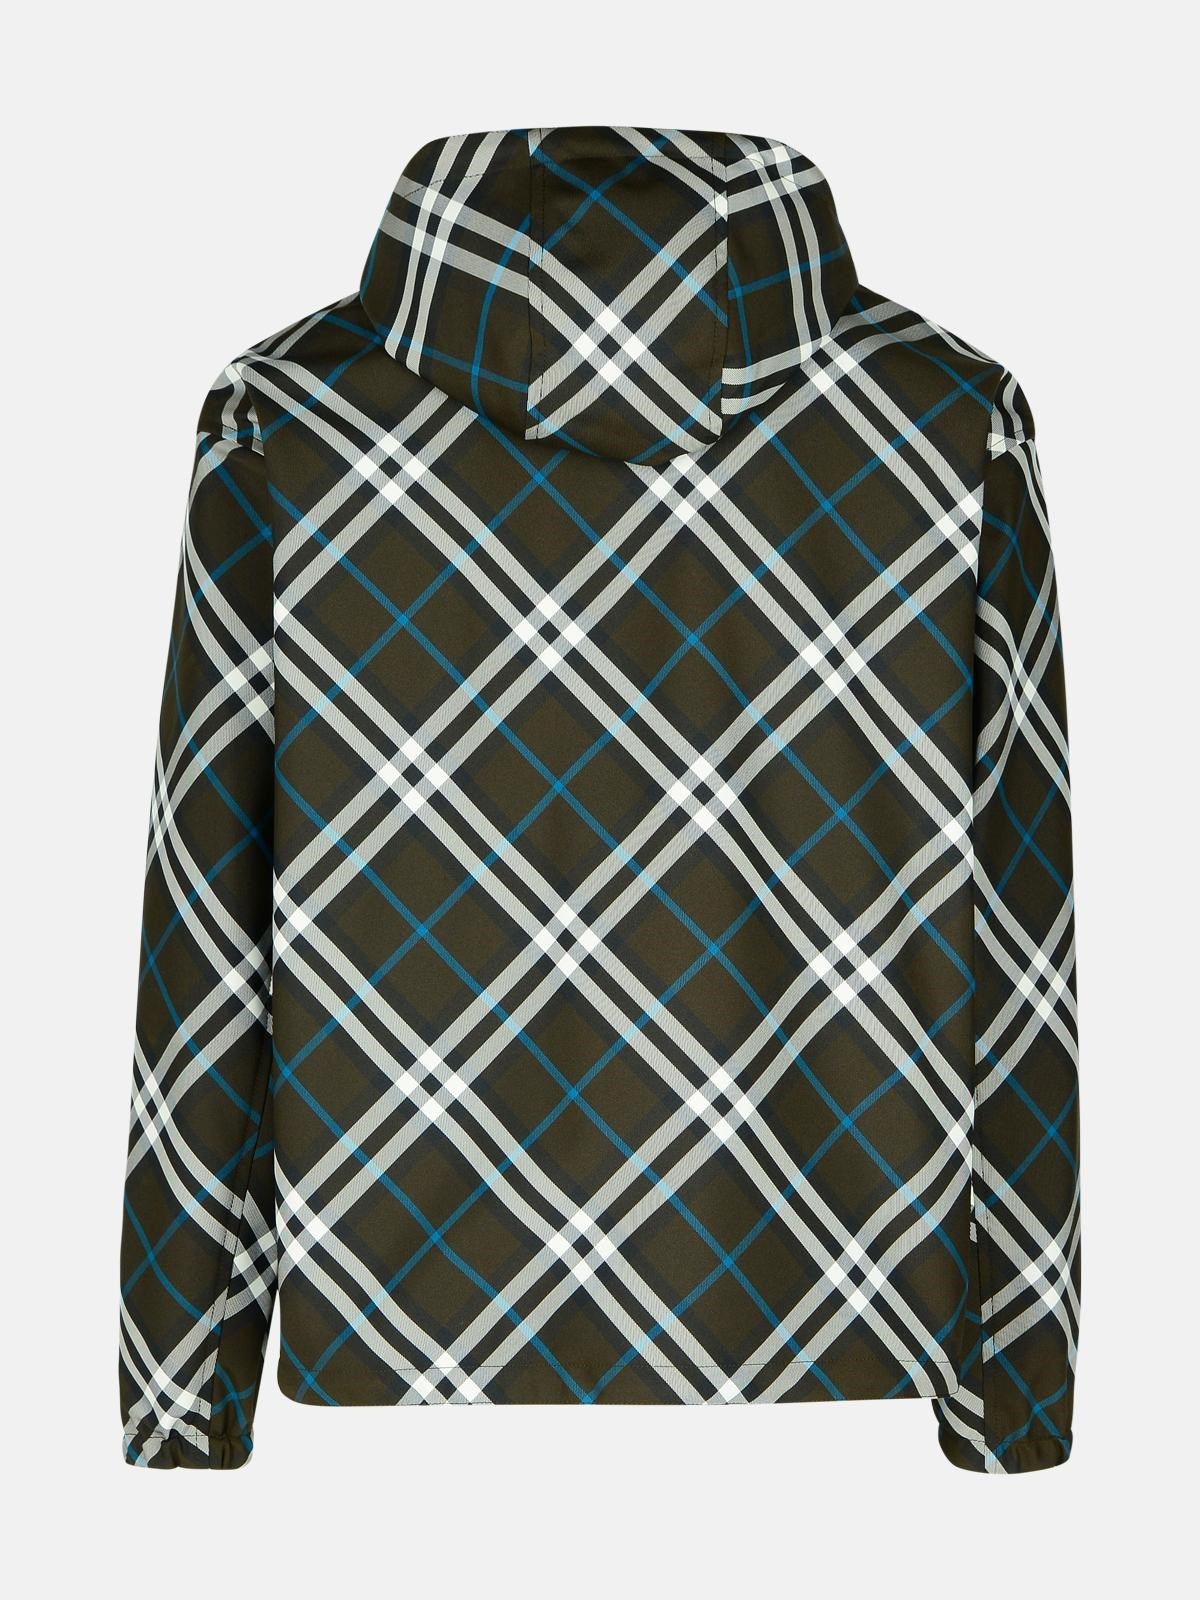 'CHECK' REVERSIBLE GREEN POLYESTER JACKET - 3